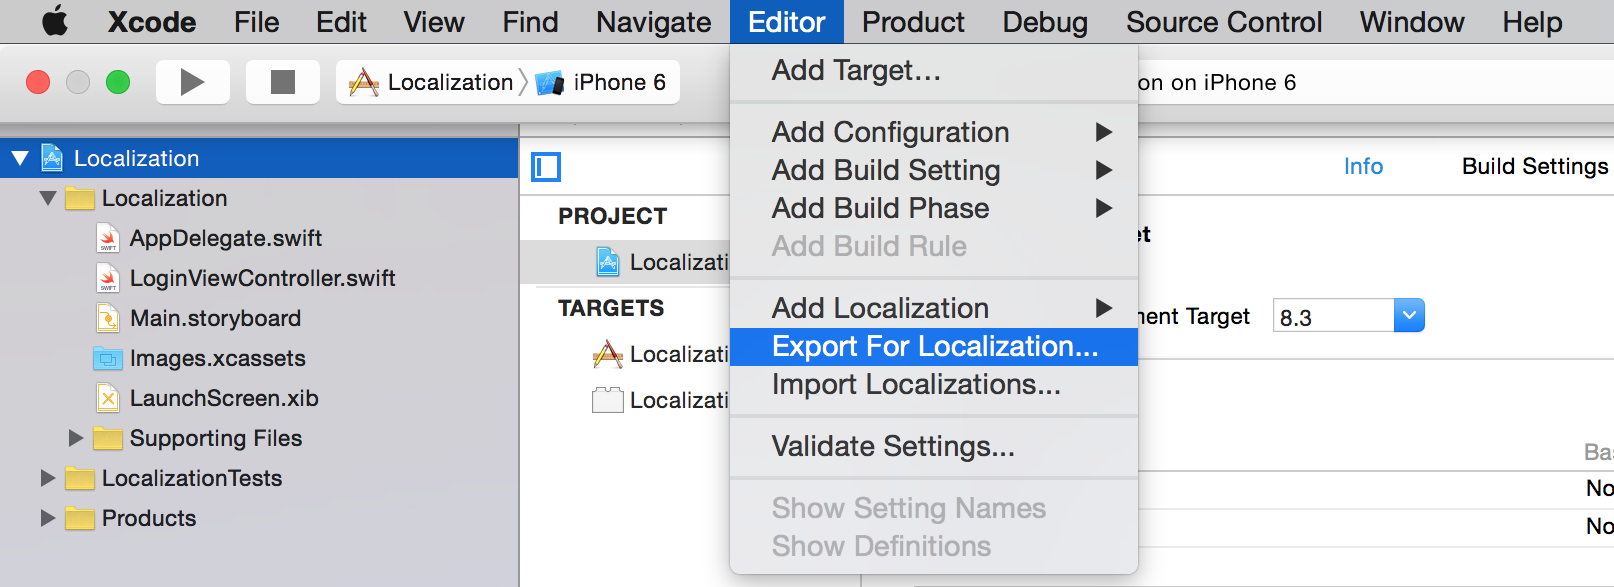 Export for Localizations